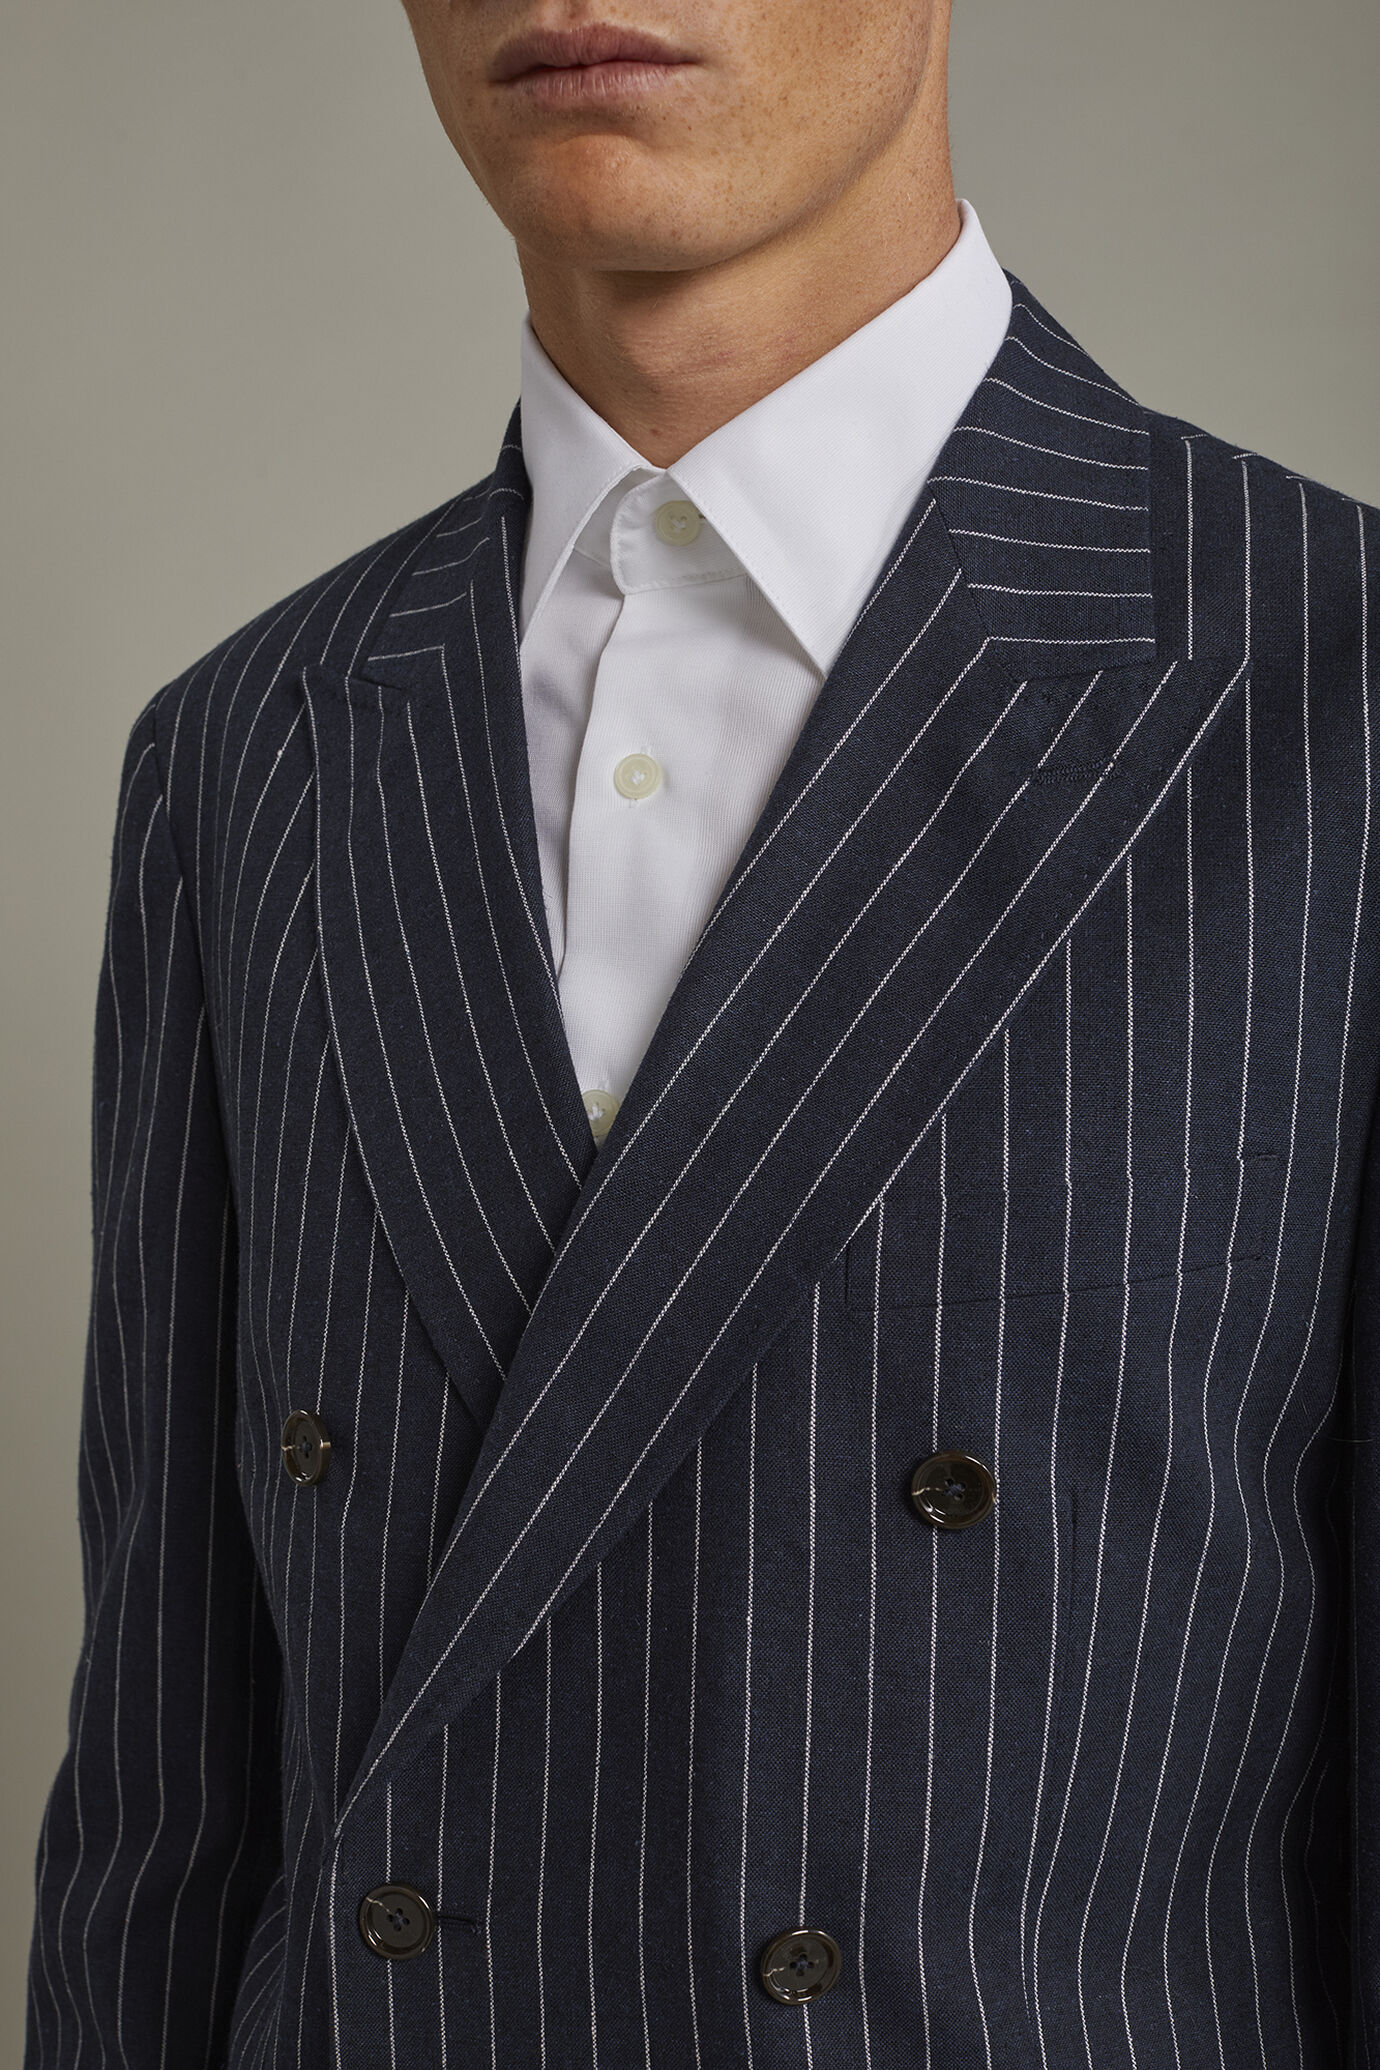 Men's unlined double-breasted blazer with spread collar and flap pockets linen and cotton fabric with regular fit pinstripe design image number 3